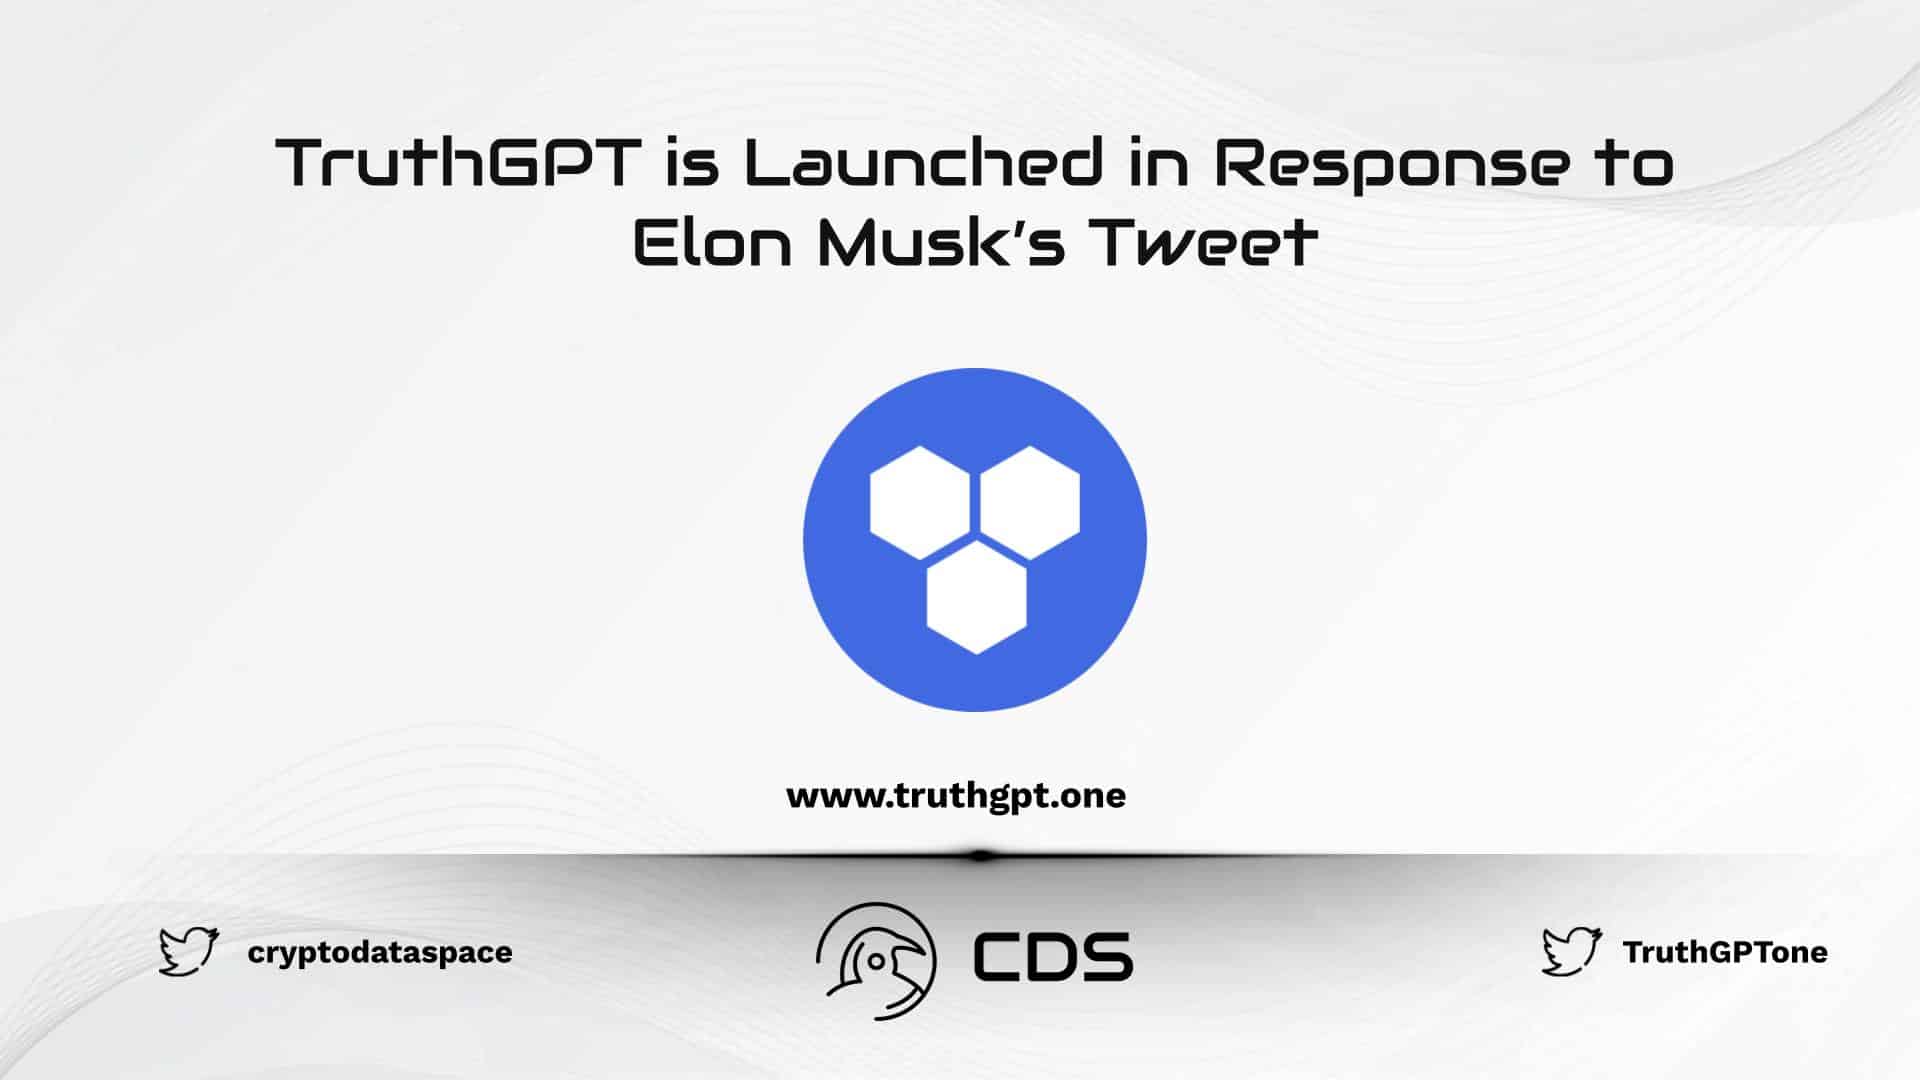 TruthGPT is Launched in Response to Elon Musk’s Tweet